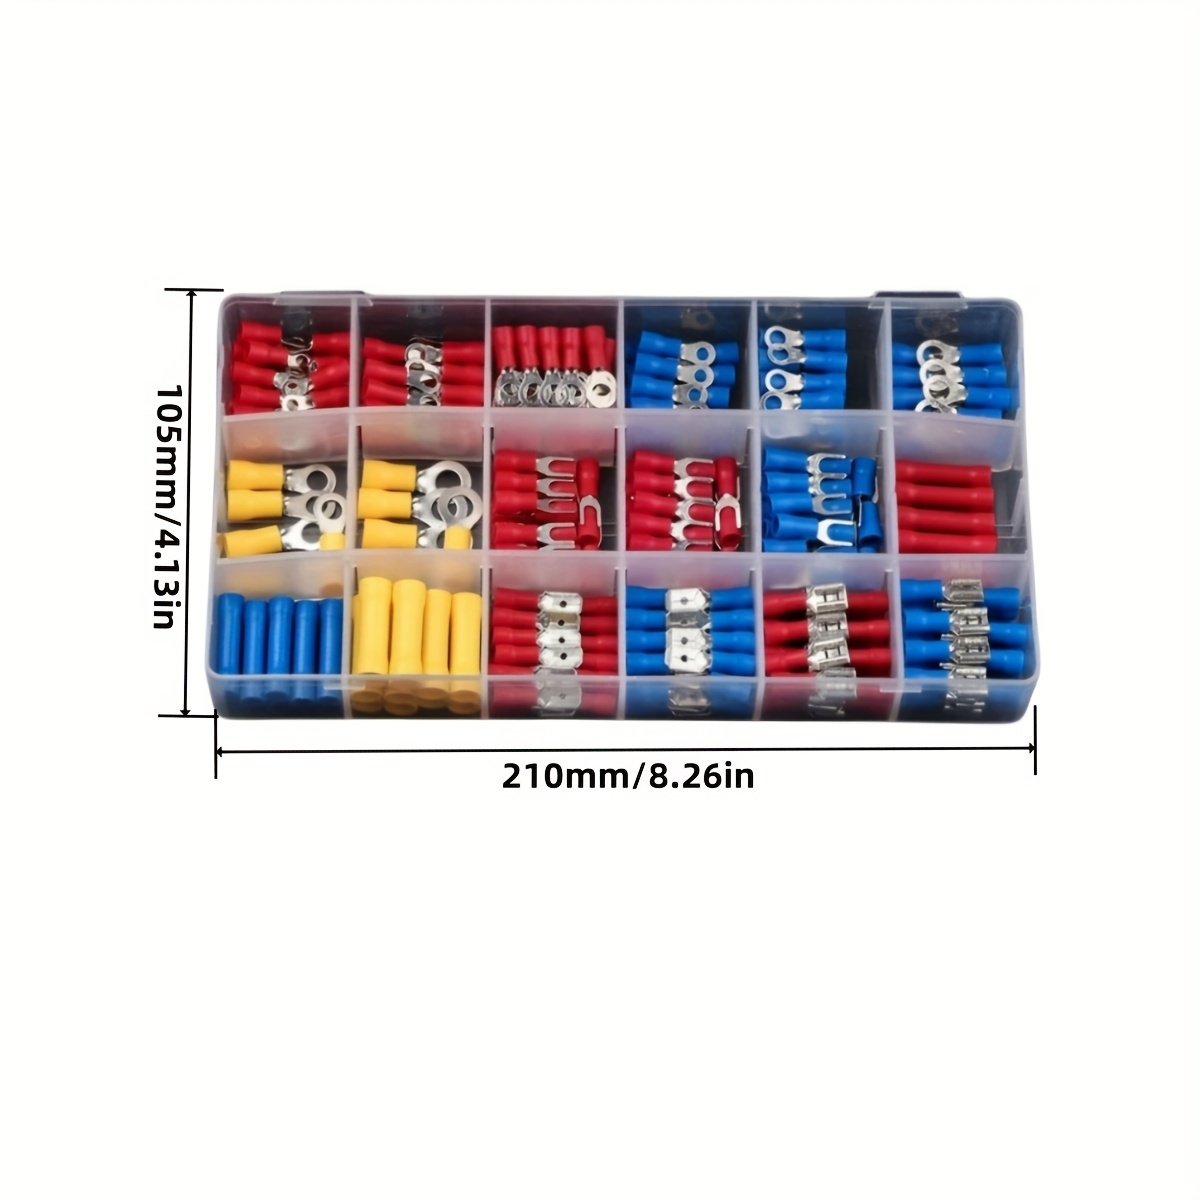 480Pcs Car Wire Assorted Insulated Electrical Terminals Connectors Crimp  Box Kit